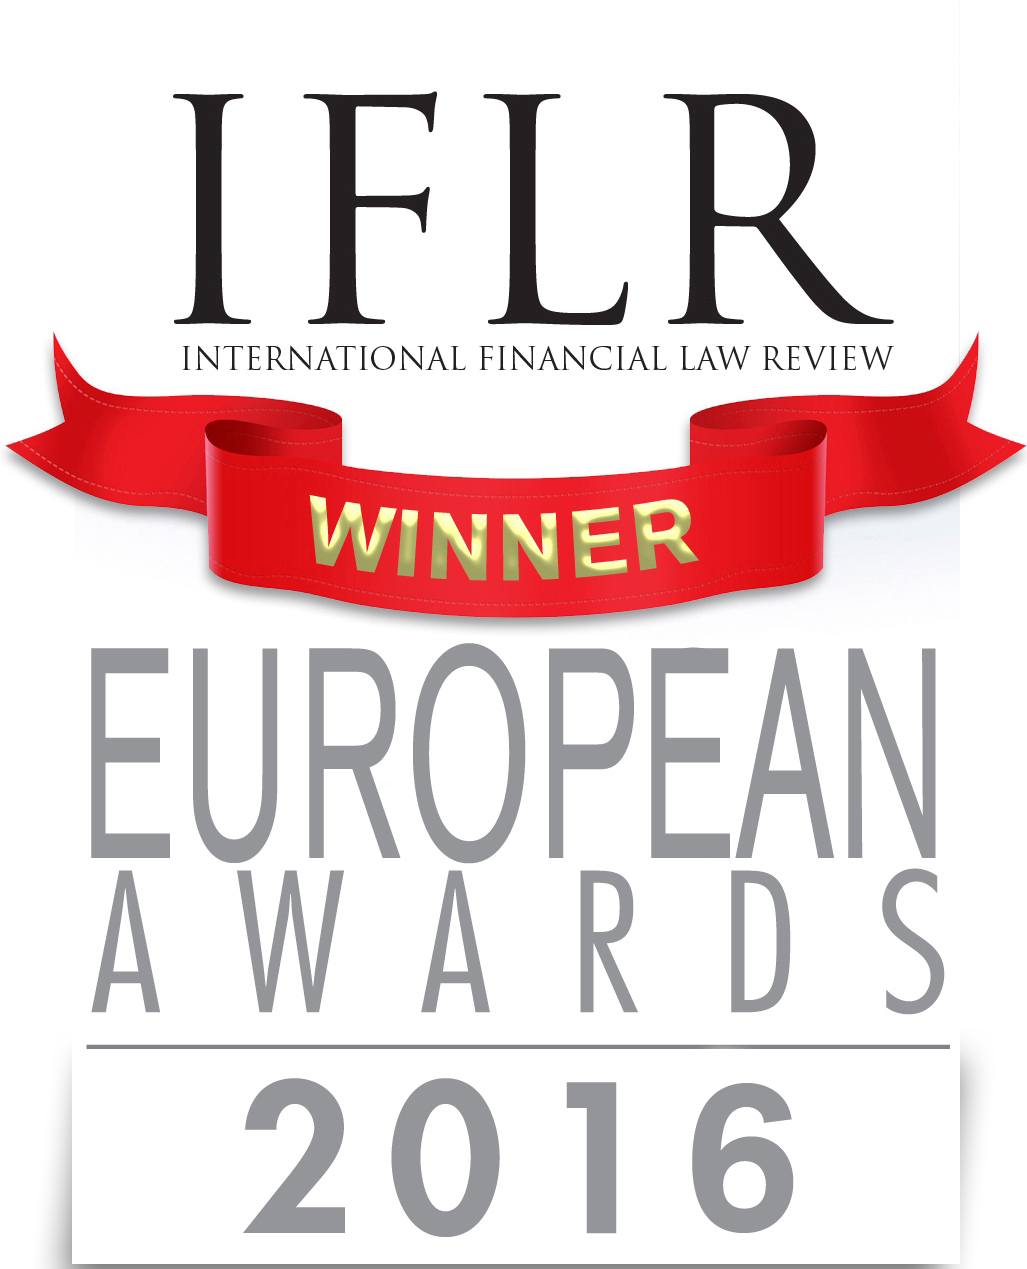 Romania: Law Firm of the Year (IFLR Europe Awards 2016)